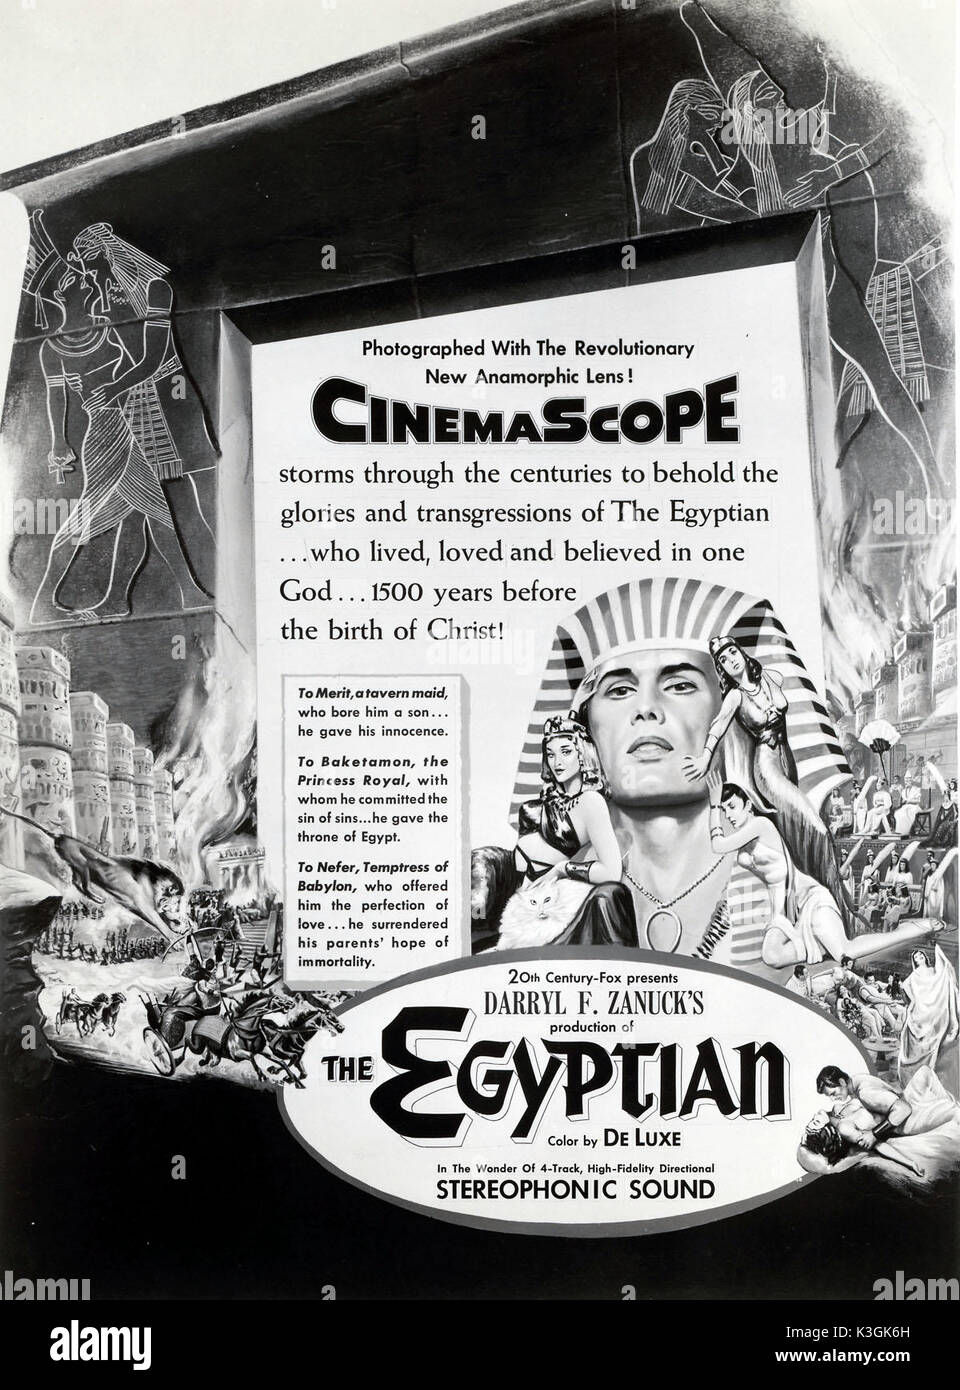 THE CINEMASCOPE FORMAT HEAVILY PROMOTED IN THIS ADVERTISEMENT FOR THE EGYPTIAN THE CINEMASCOPE FORMAT HEAVILY PROMOTED IN THIS ADVERTISEMENT FOR THE EGYPTIAN Stock Photo